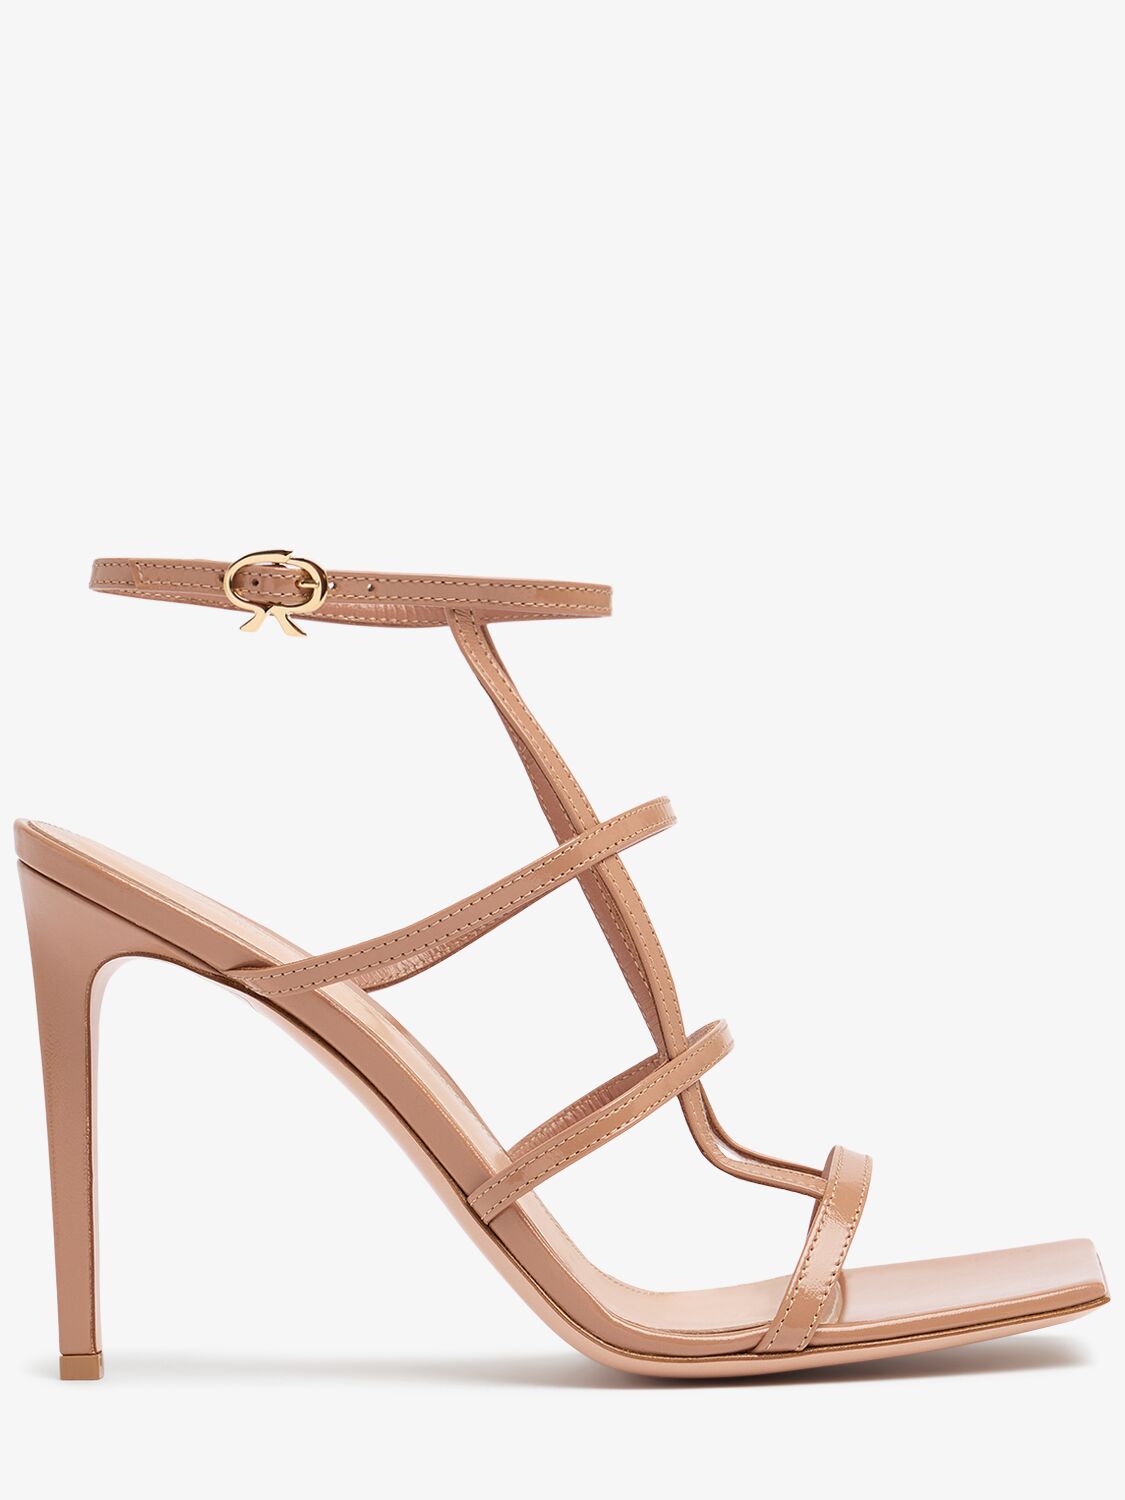 Gianvito Rossi 95mm Leather Sandals In Praline